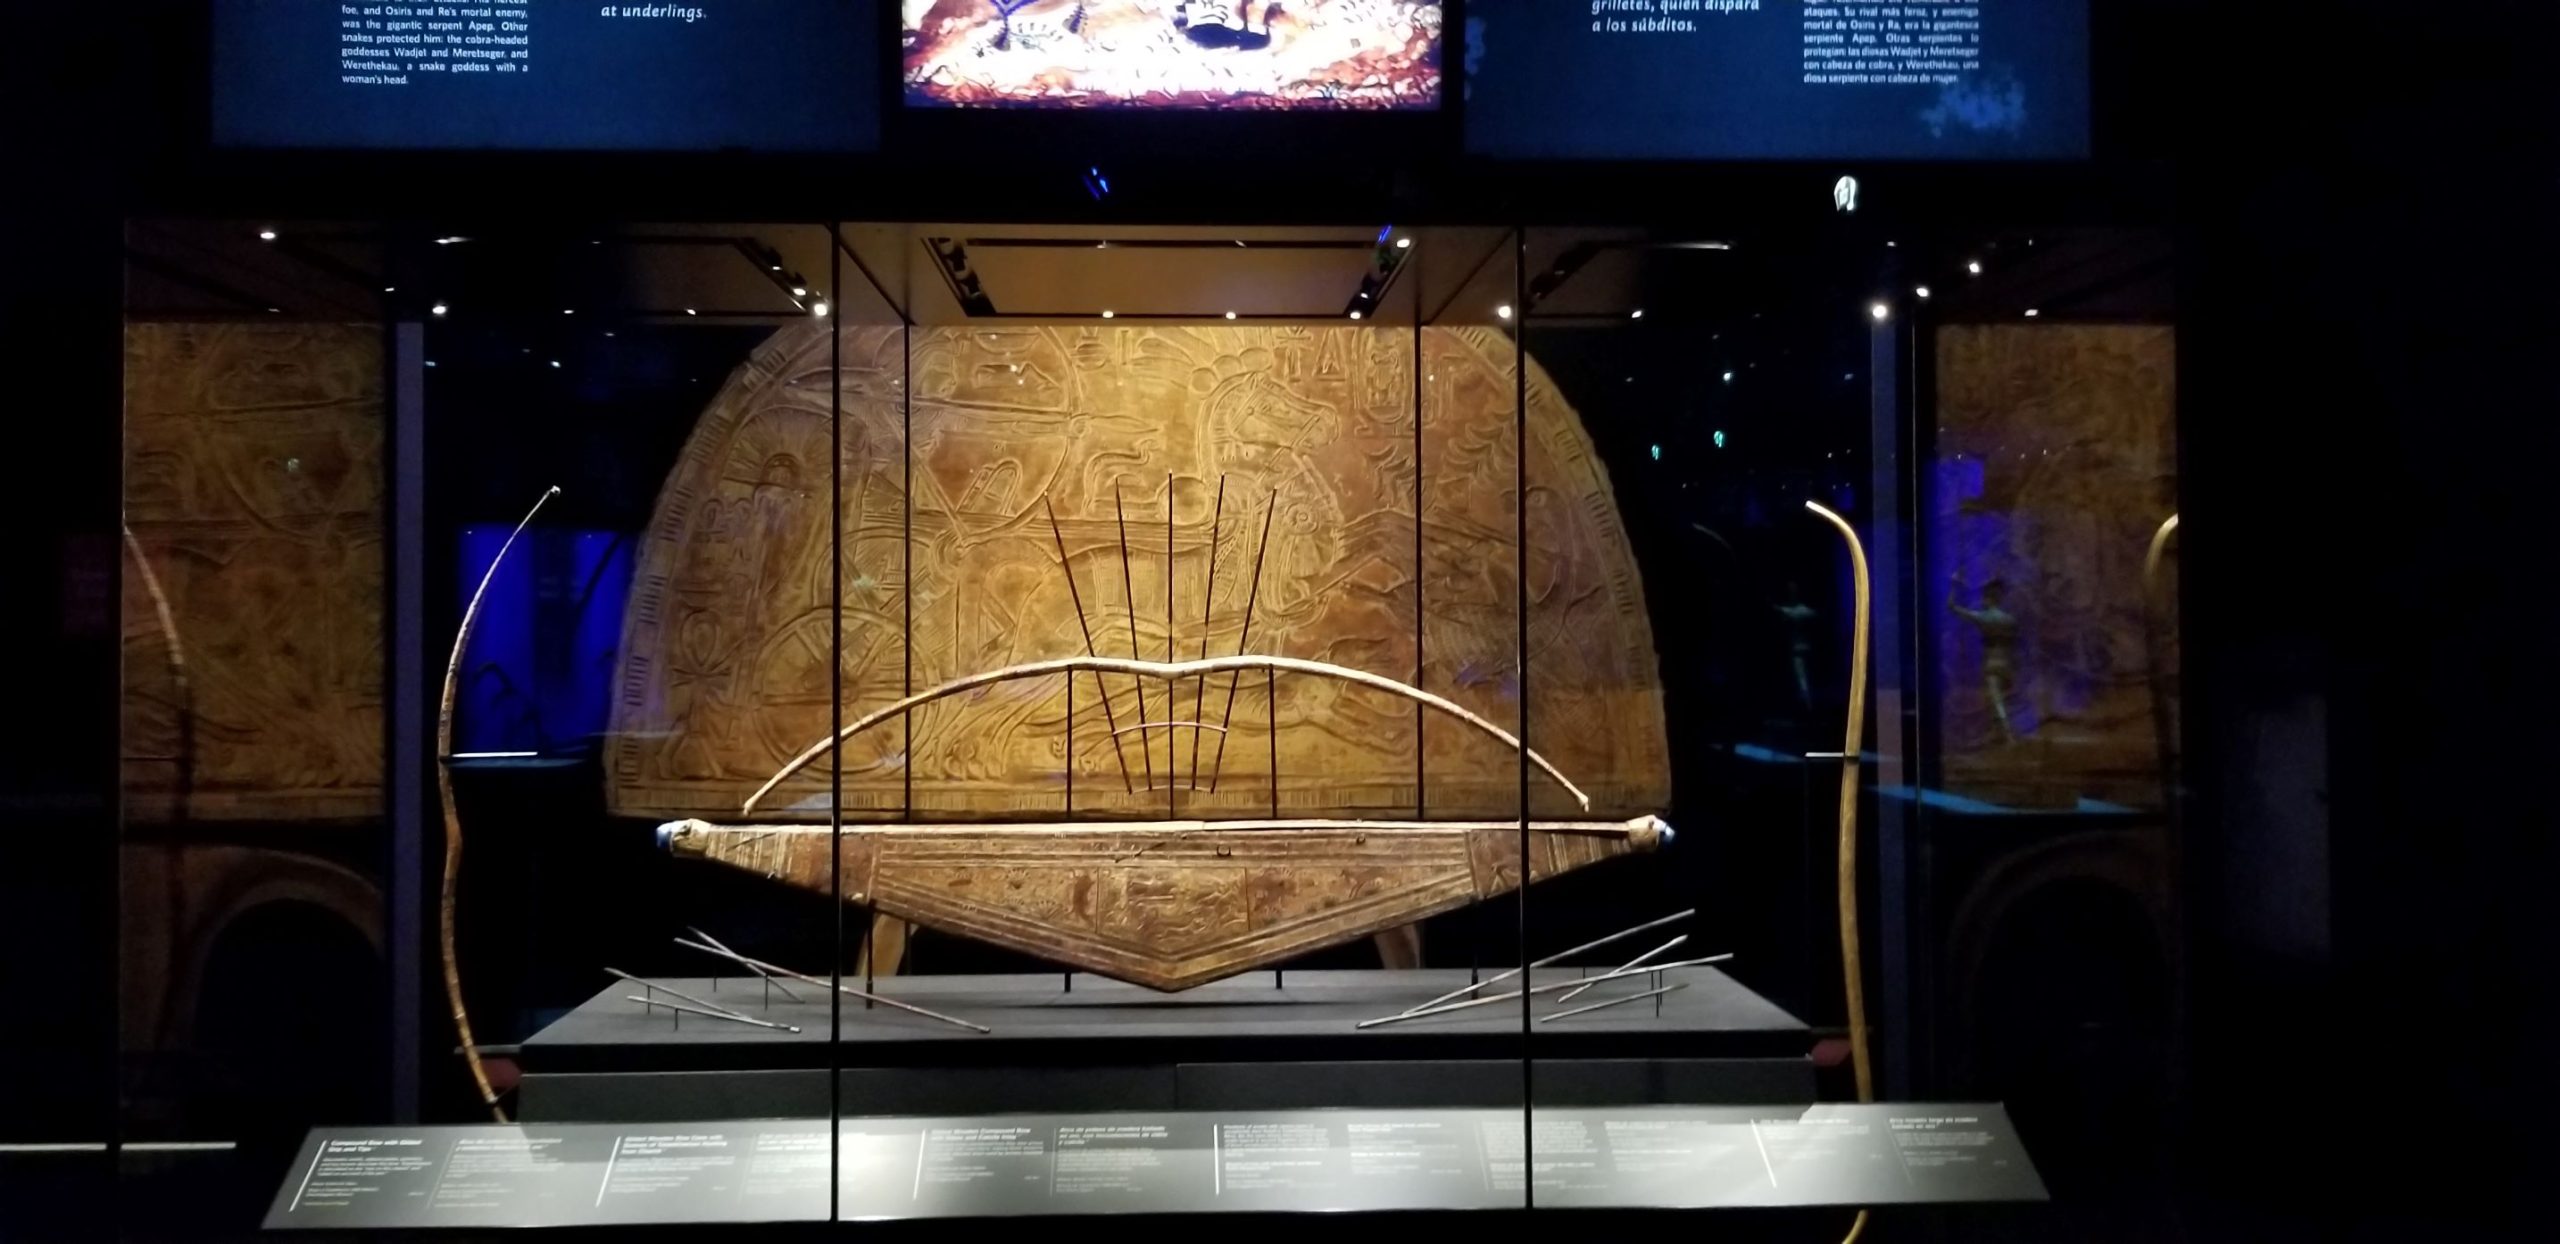 Ancient Egypt Field Trip Idea: The King Tut Exhibit at the California Science Center